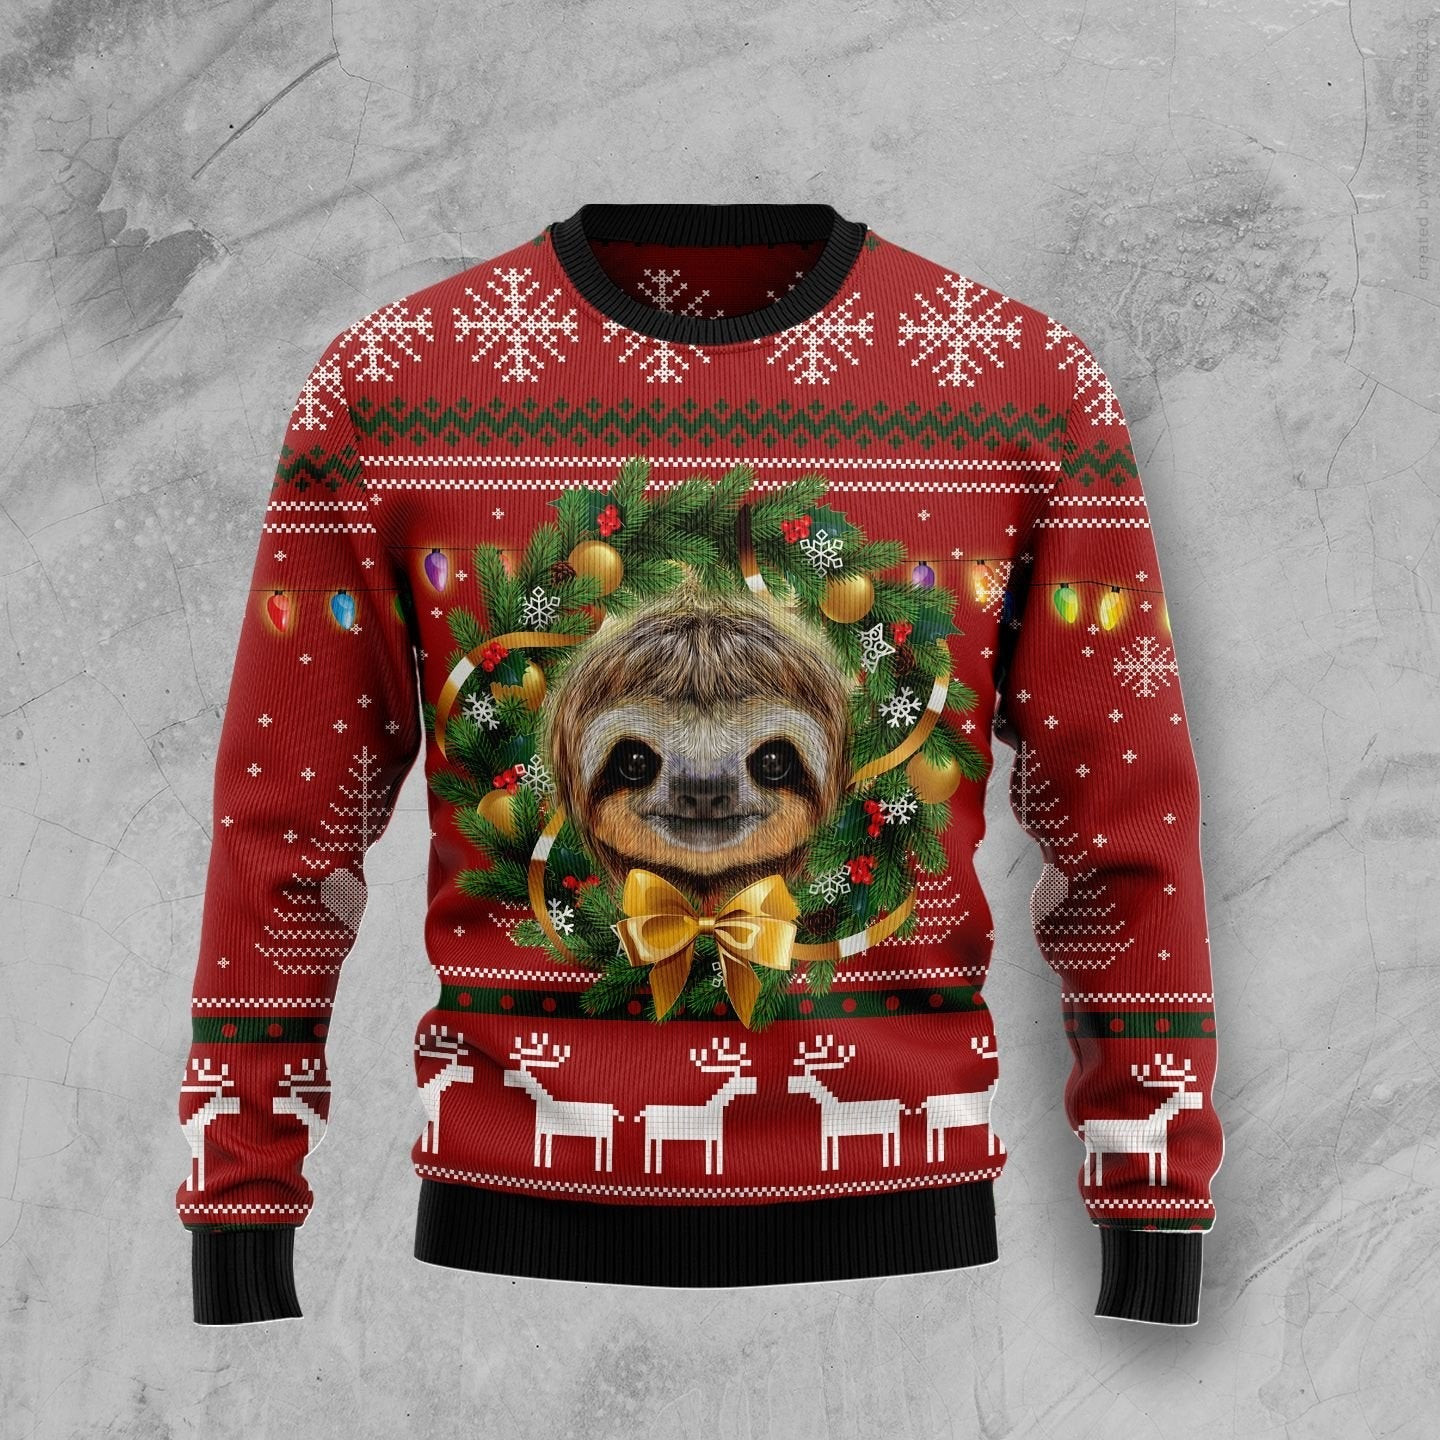 Merry Slothmas Ugly Christmas Sweater Ugly Sweater For Men Women